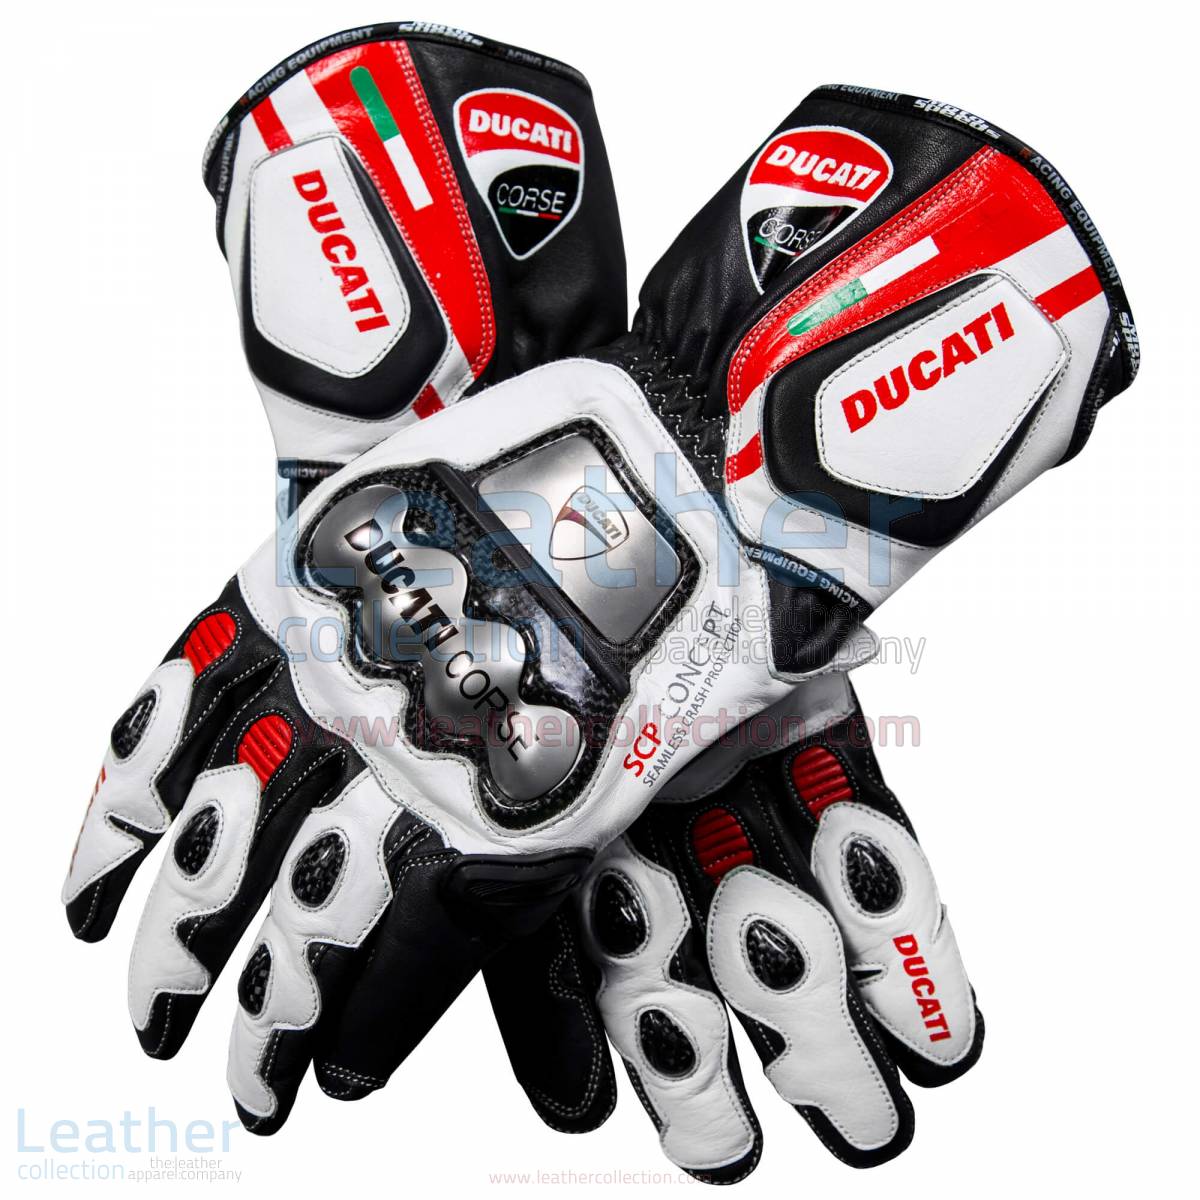 Ducati Corse Leather Motorcycle Gloves – Ducati Gloves